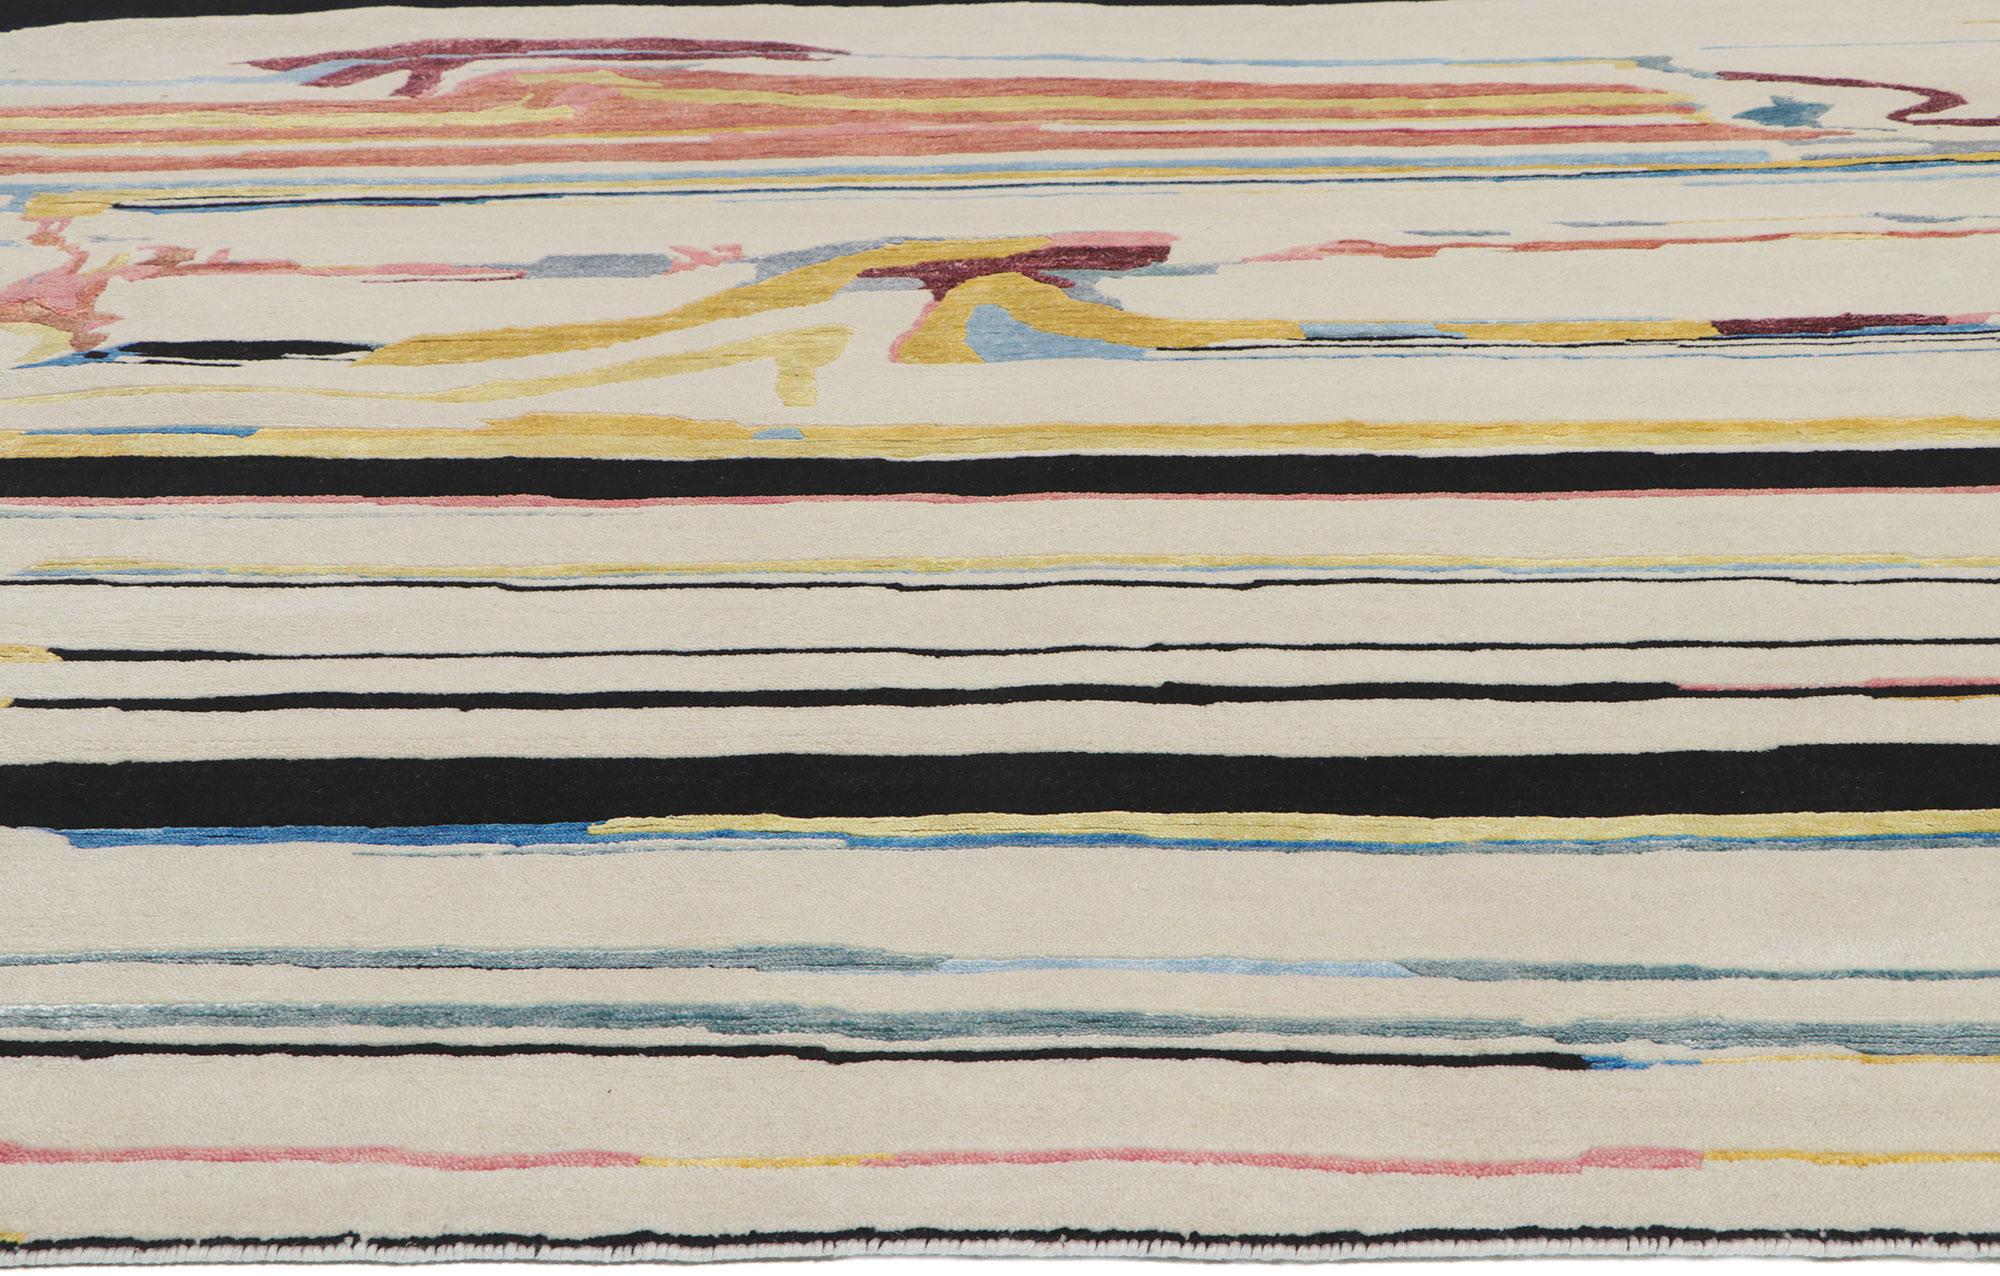 Expressionist New Contemporary Abstract Rug Inspired by Franz Kline and Gerhard Richter